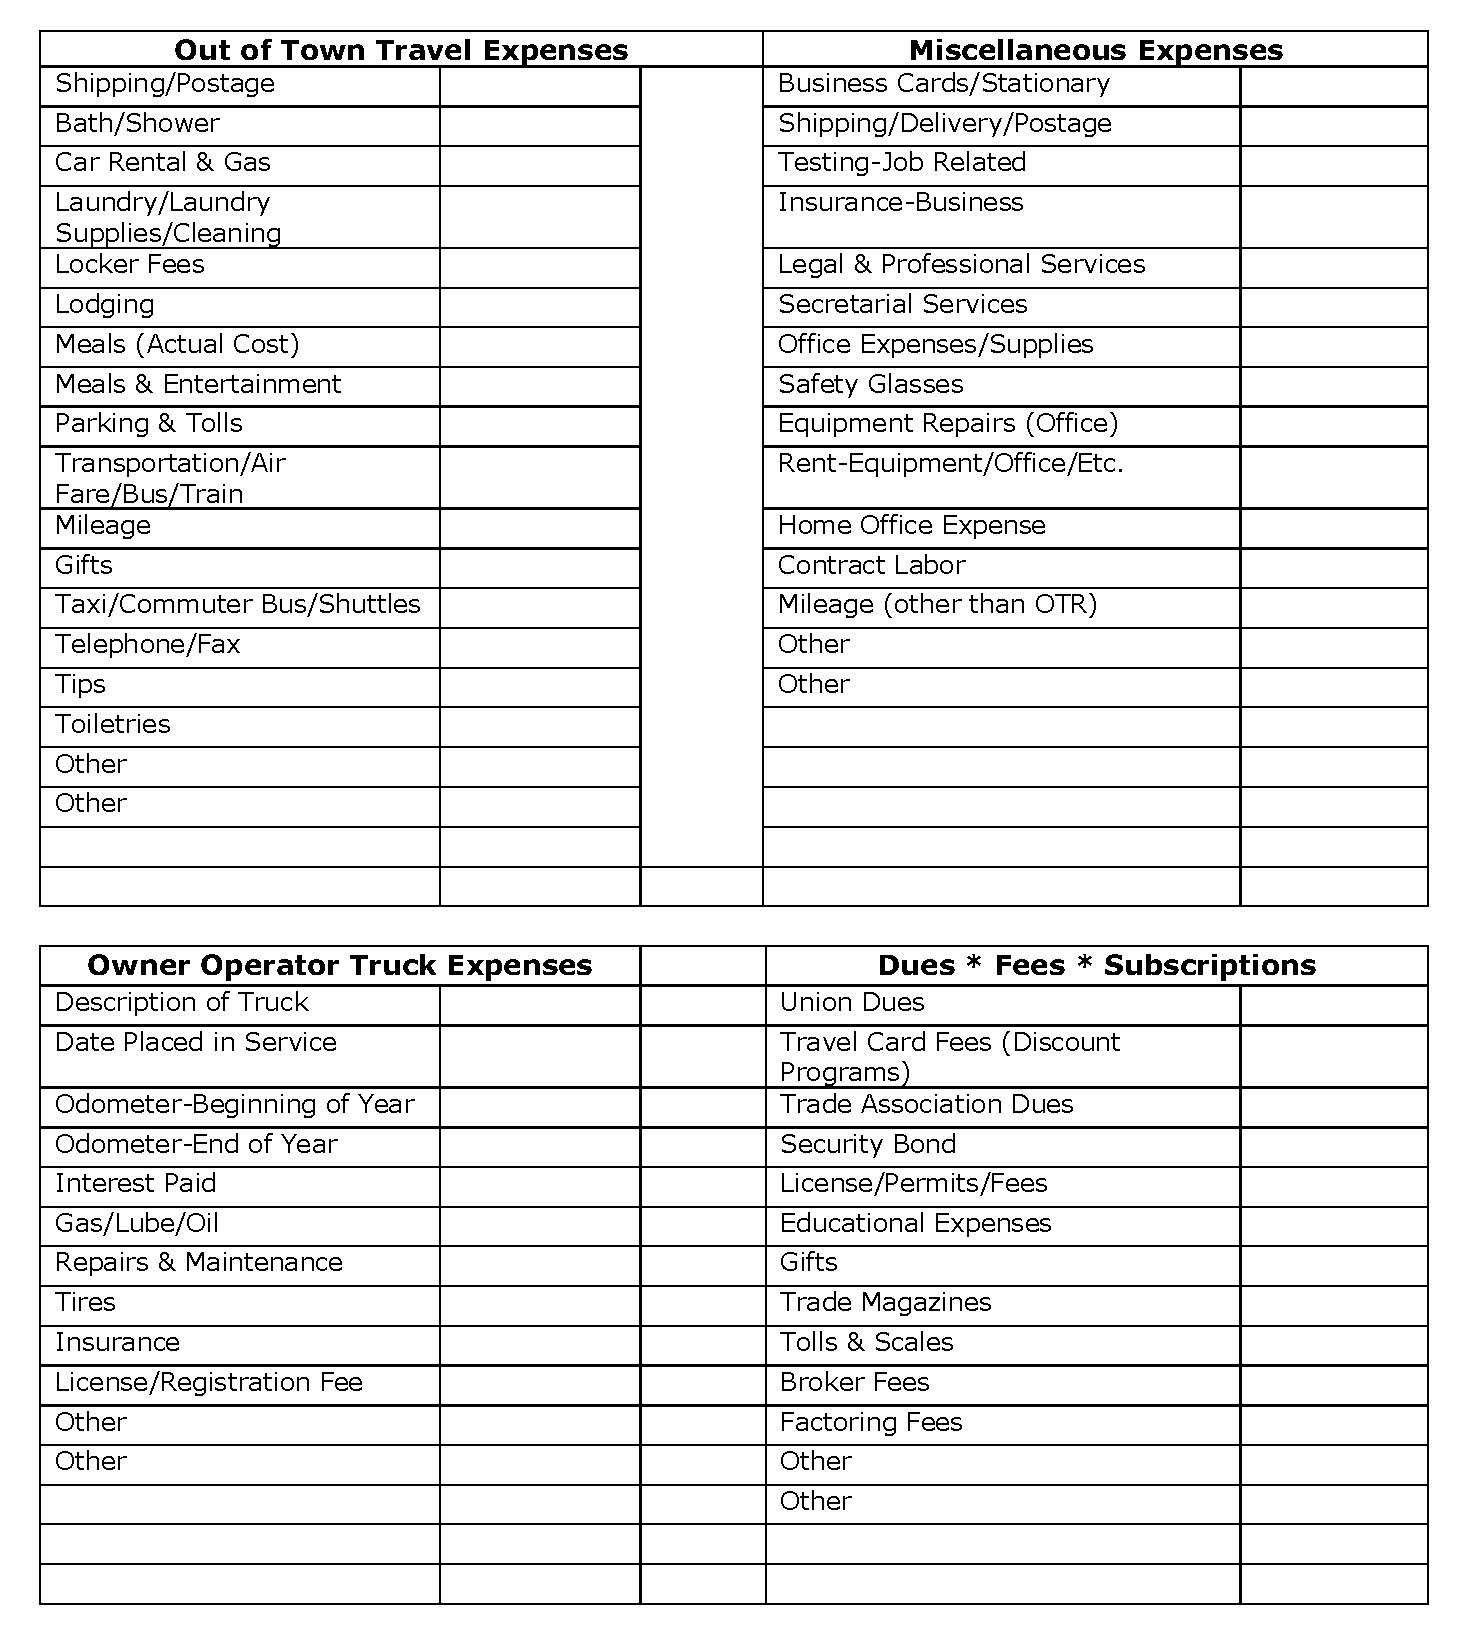 Worksheet For Taxes The Best Worksheets Image Collection  Download Also Worksheet For Taxes